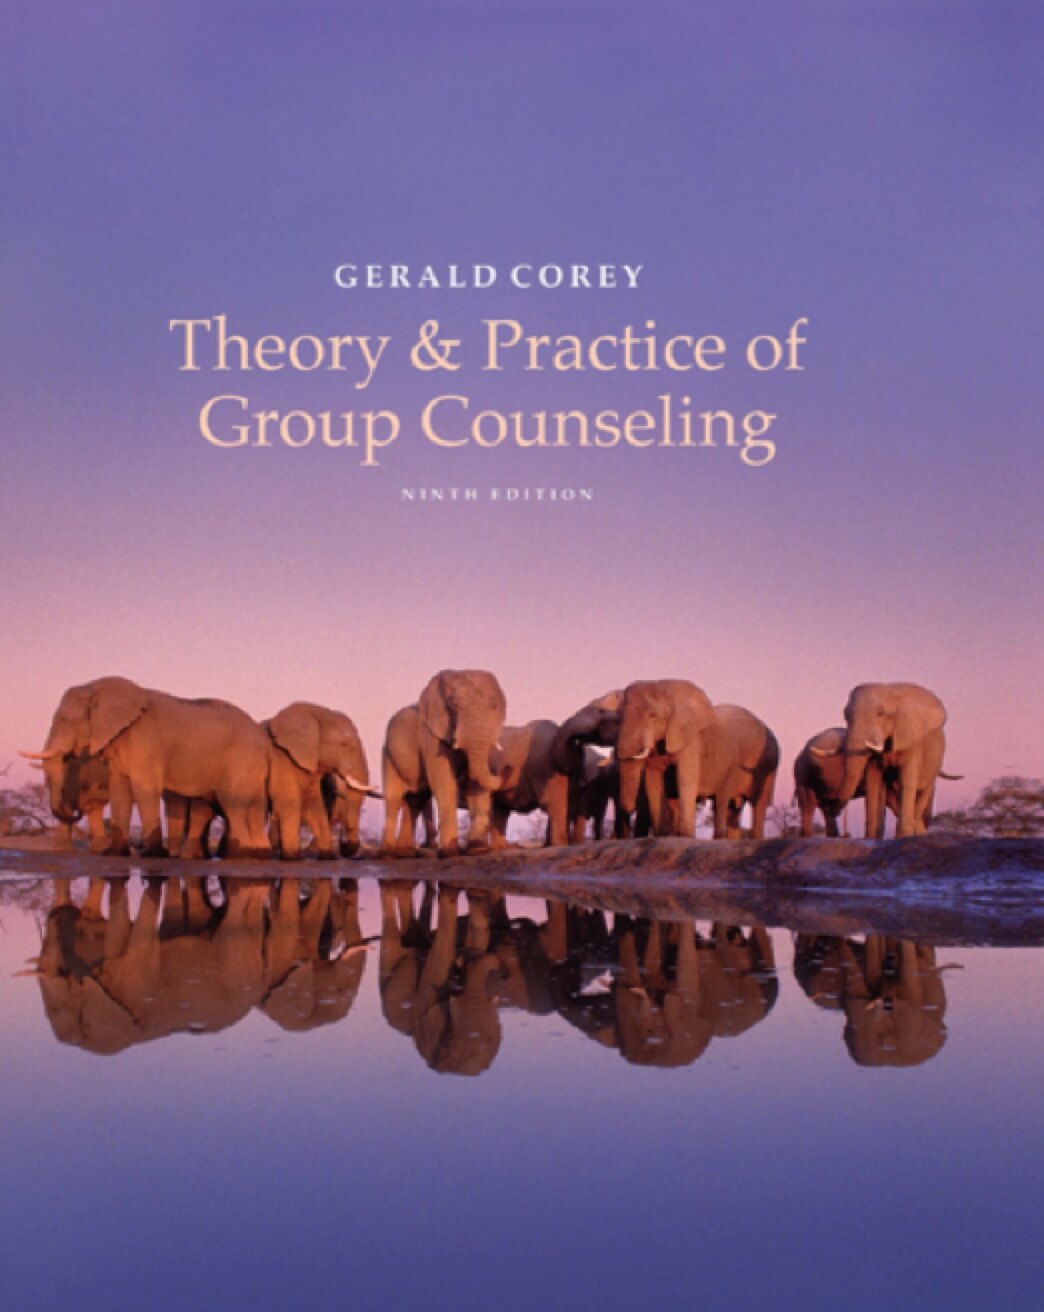 Corey, G. (2016). Theory & Practice of Group Counseling (Ninth edition). Cengage Learning.